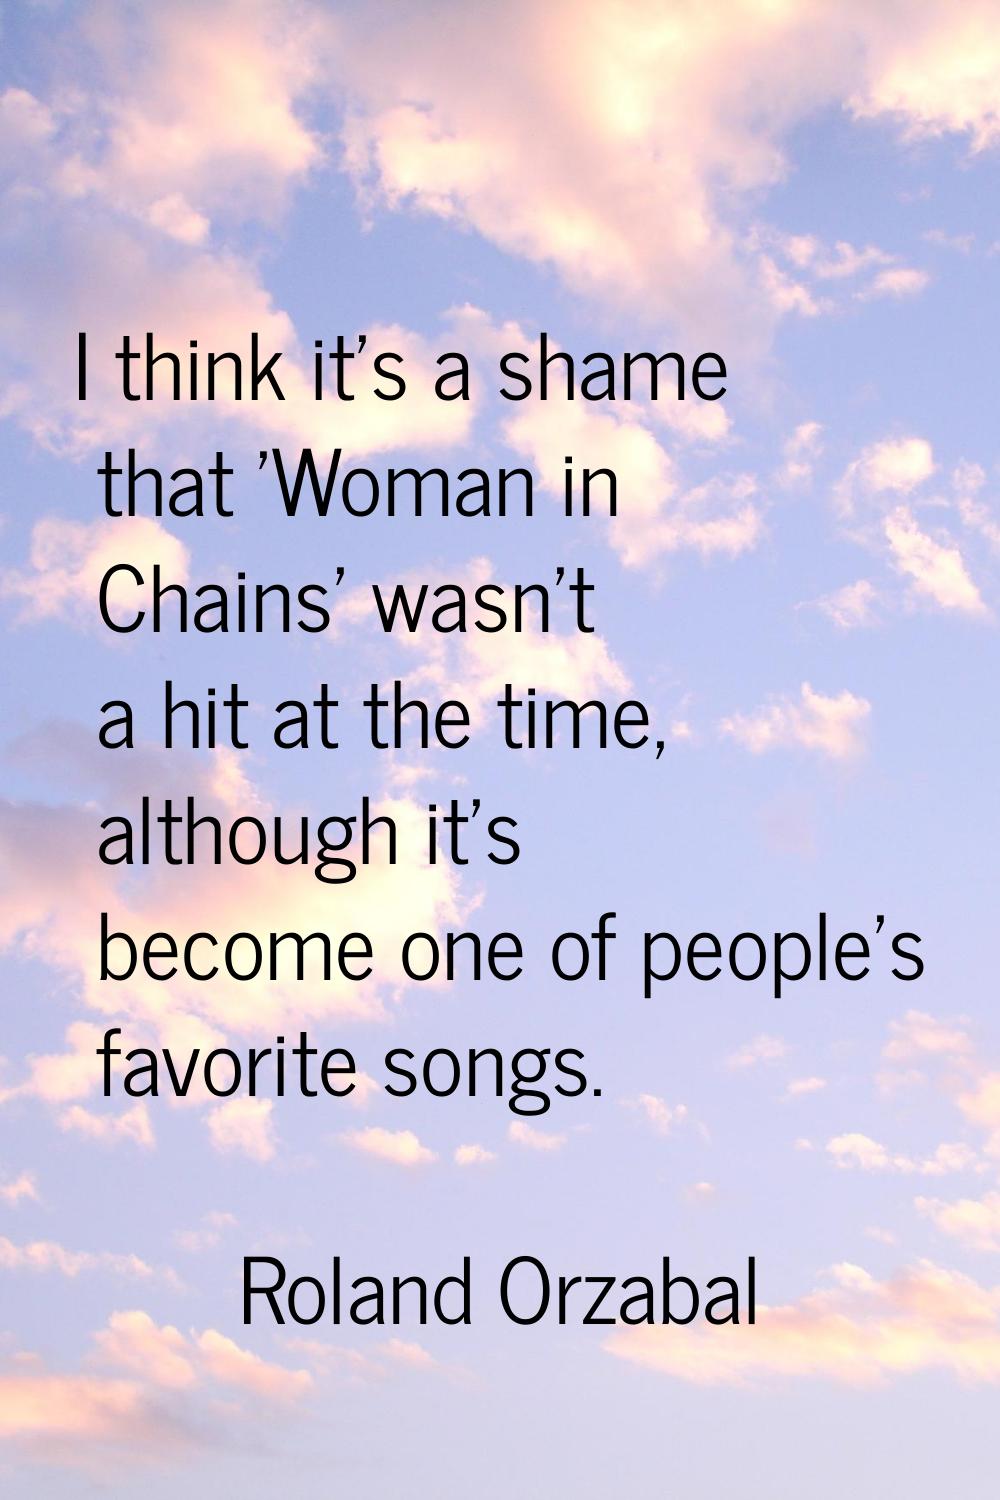 I think it’s a shame that 'Woman in Chains' wasn’t a hit at the time, although it’s become one of p